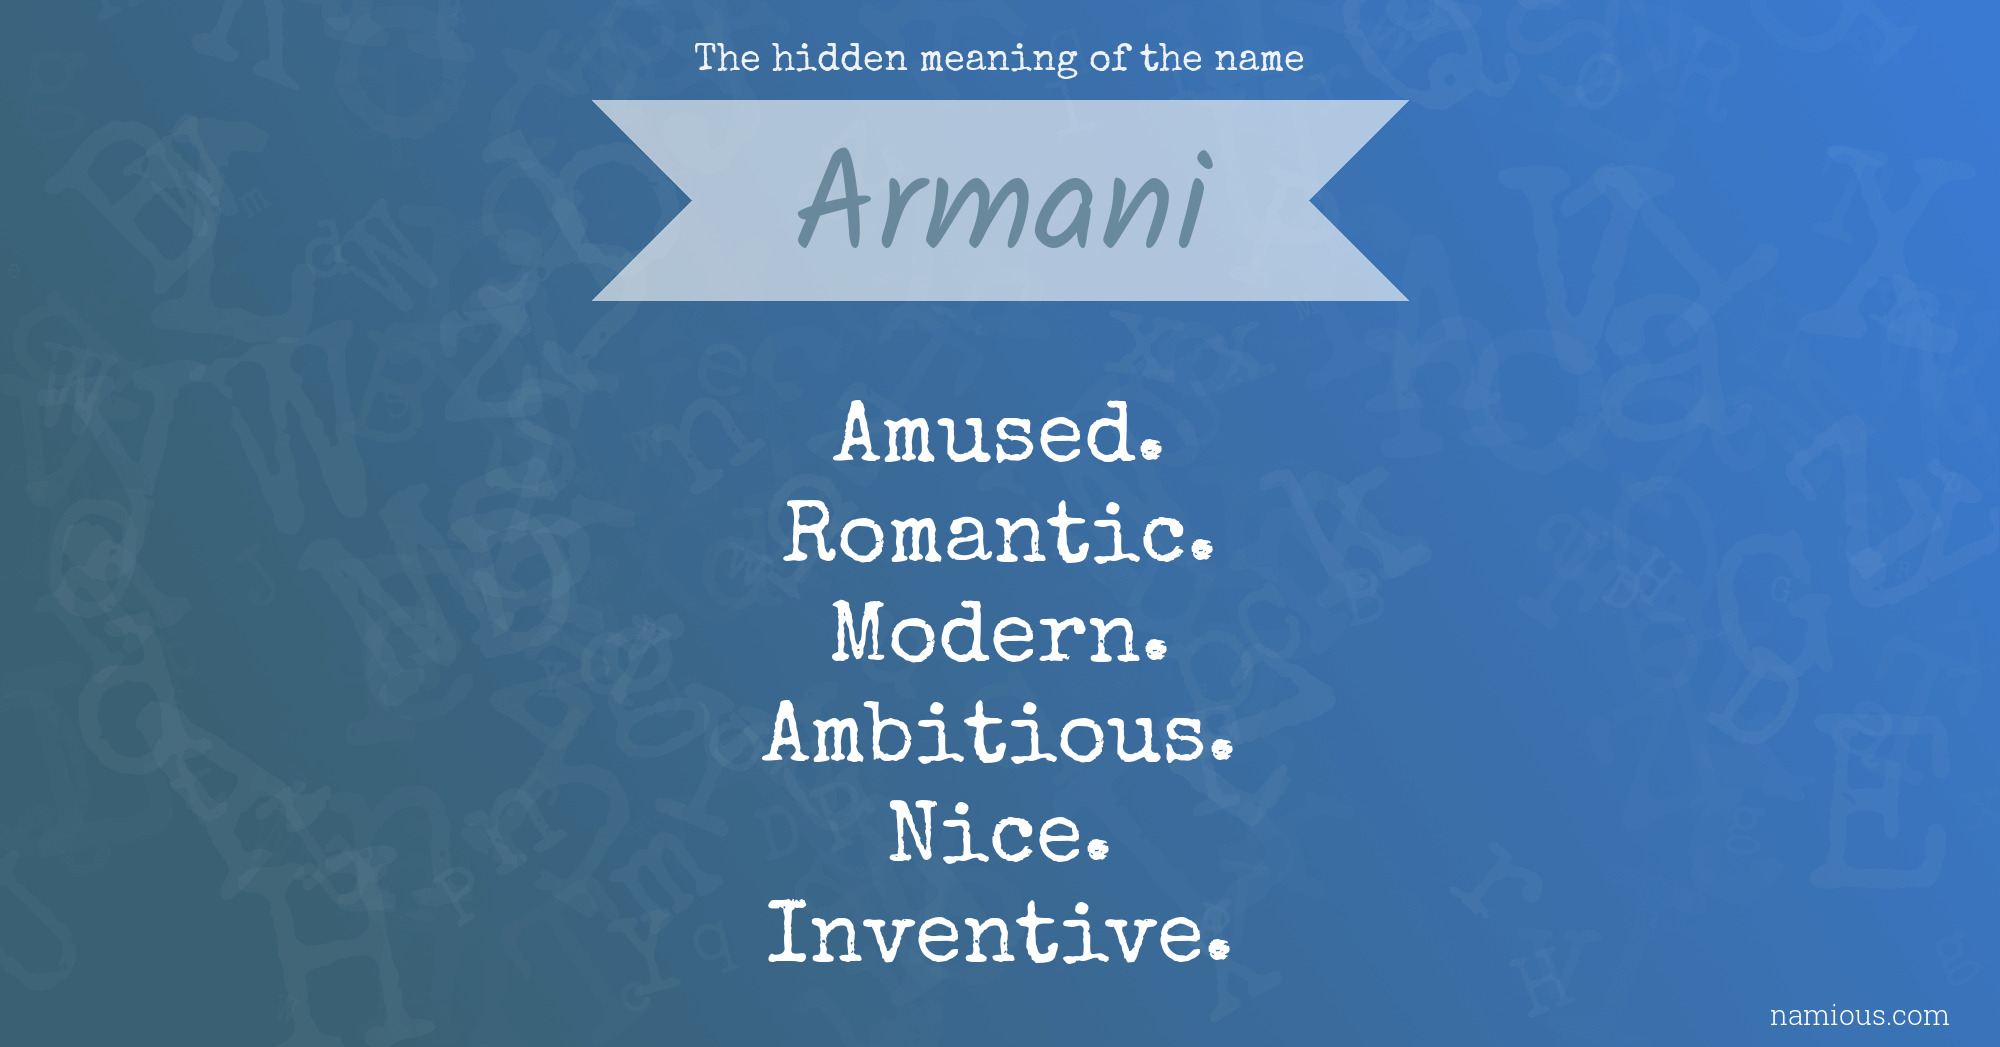 The hidden meaning of the name Armani